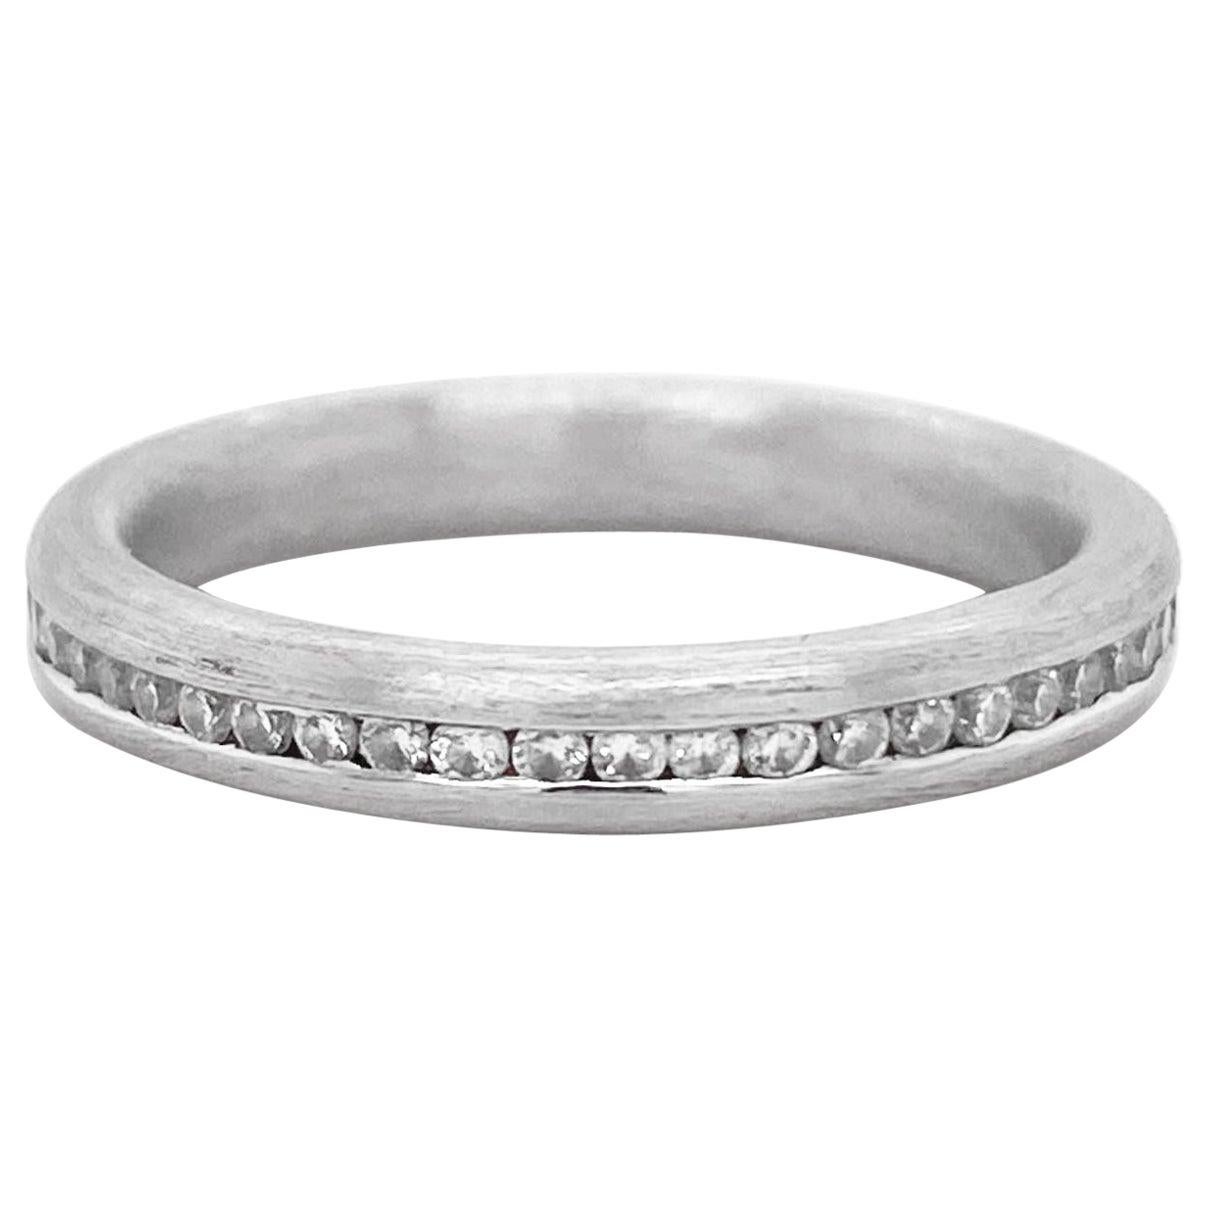 Diamond Channel Band, Brushed White Gold, Round Diamond, Stackable, Wedding Ring